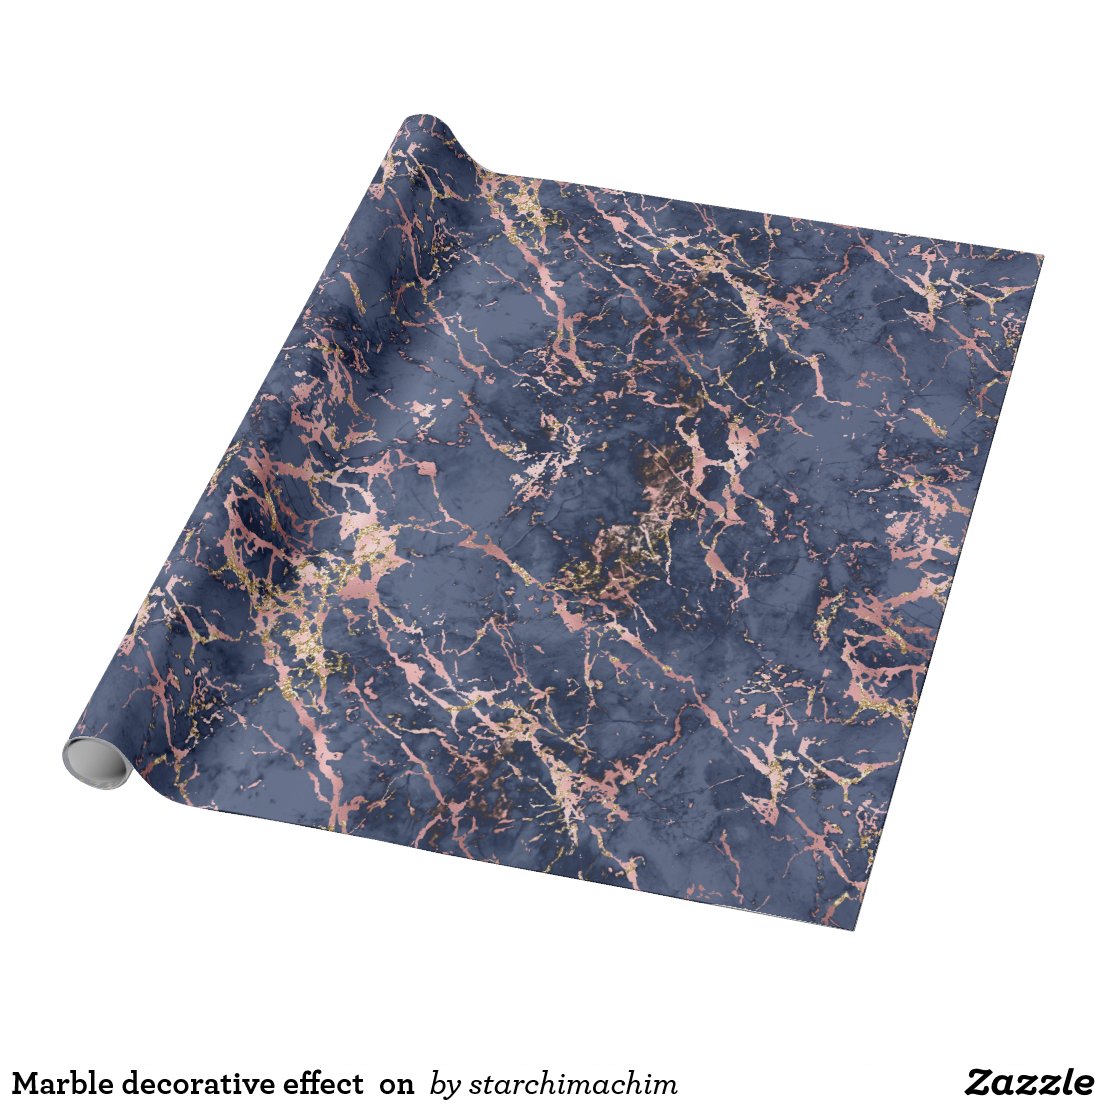 marble decorative effect on wrapping paper rb130eca398cd4842bbef9d5afc20eb4e zkehb 8byvr 1024.jpg